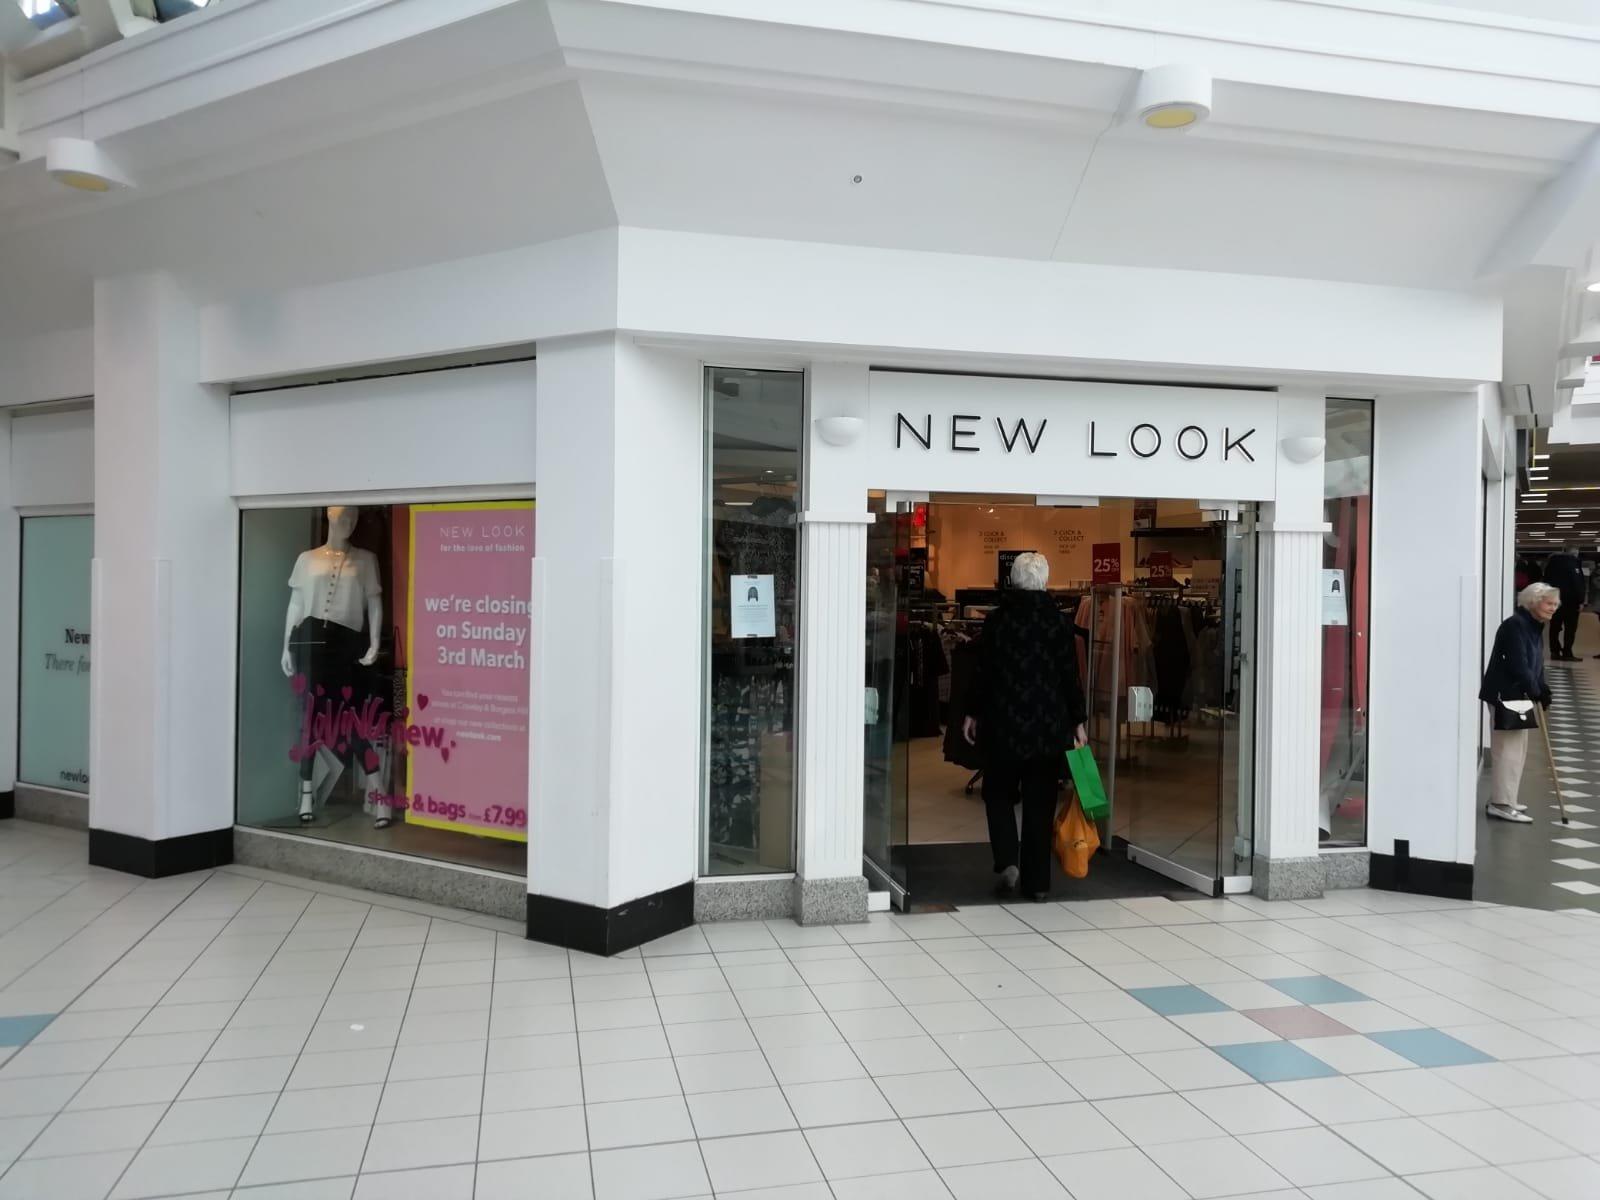 New Look Horsham closed earlier this year